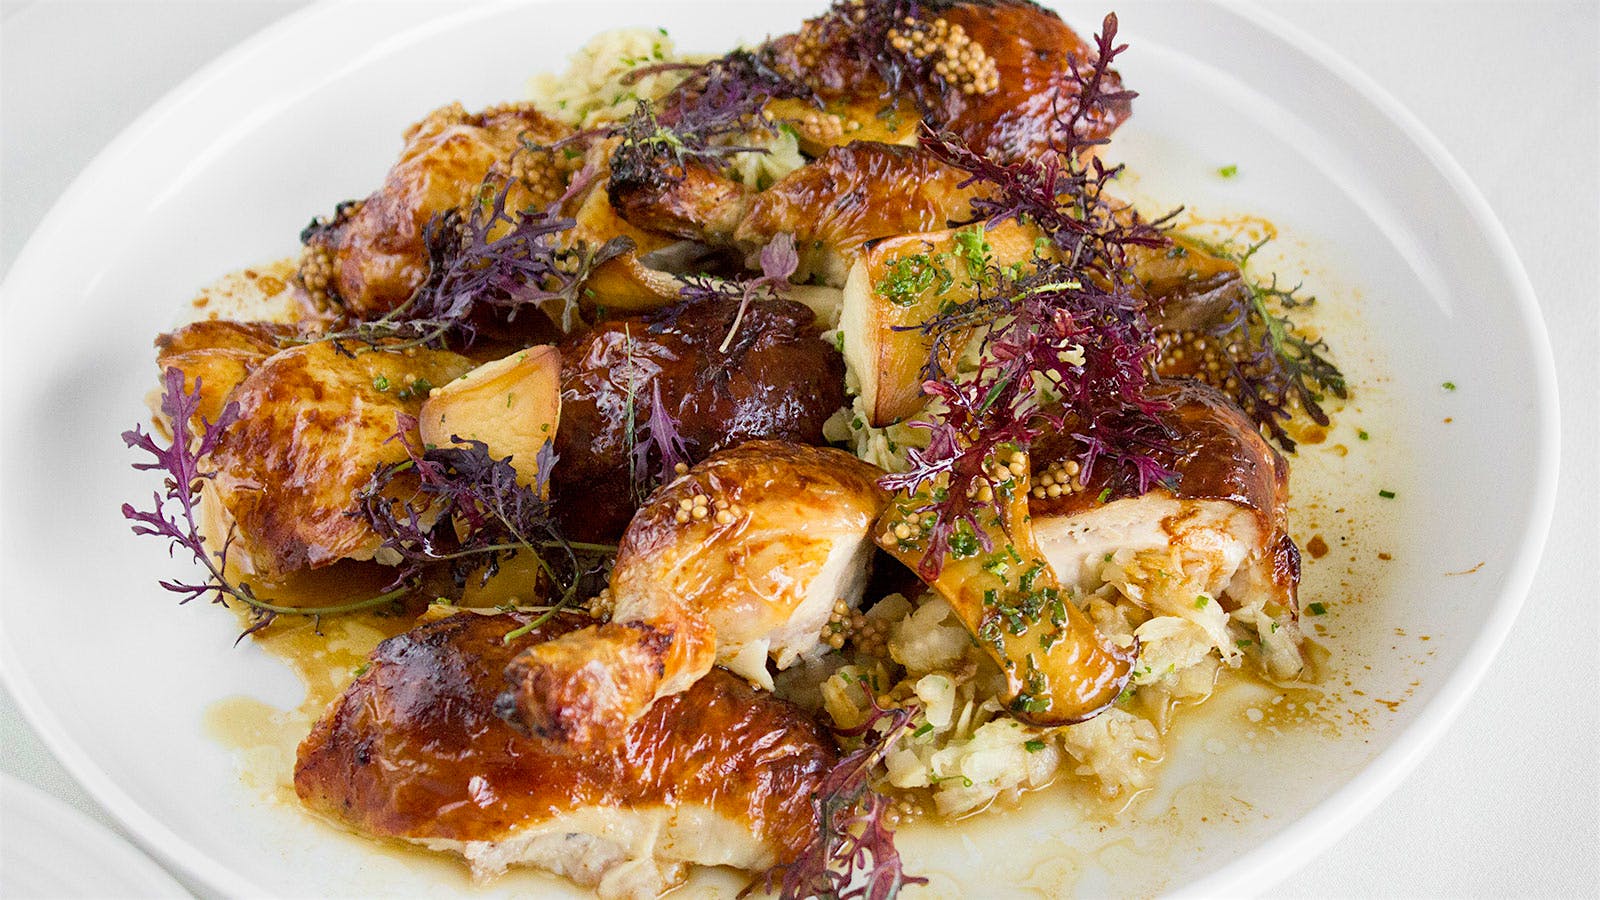 Roast Chicken with Celery Root, Mushrooms and Pickled Mustard Seeds